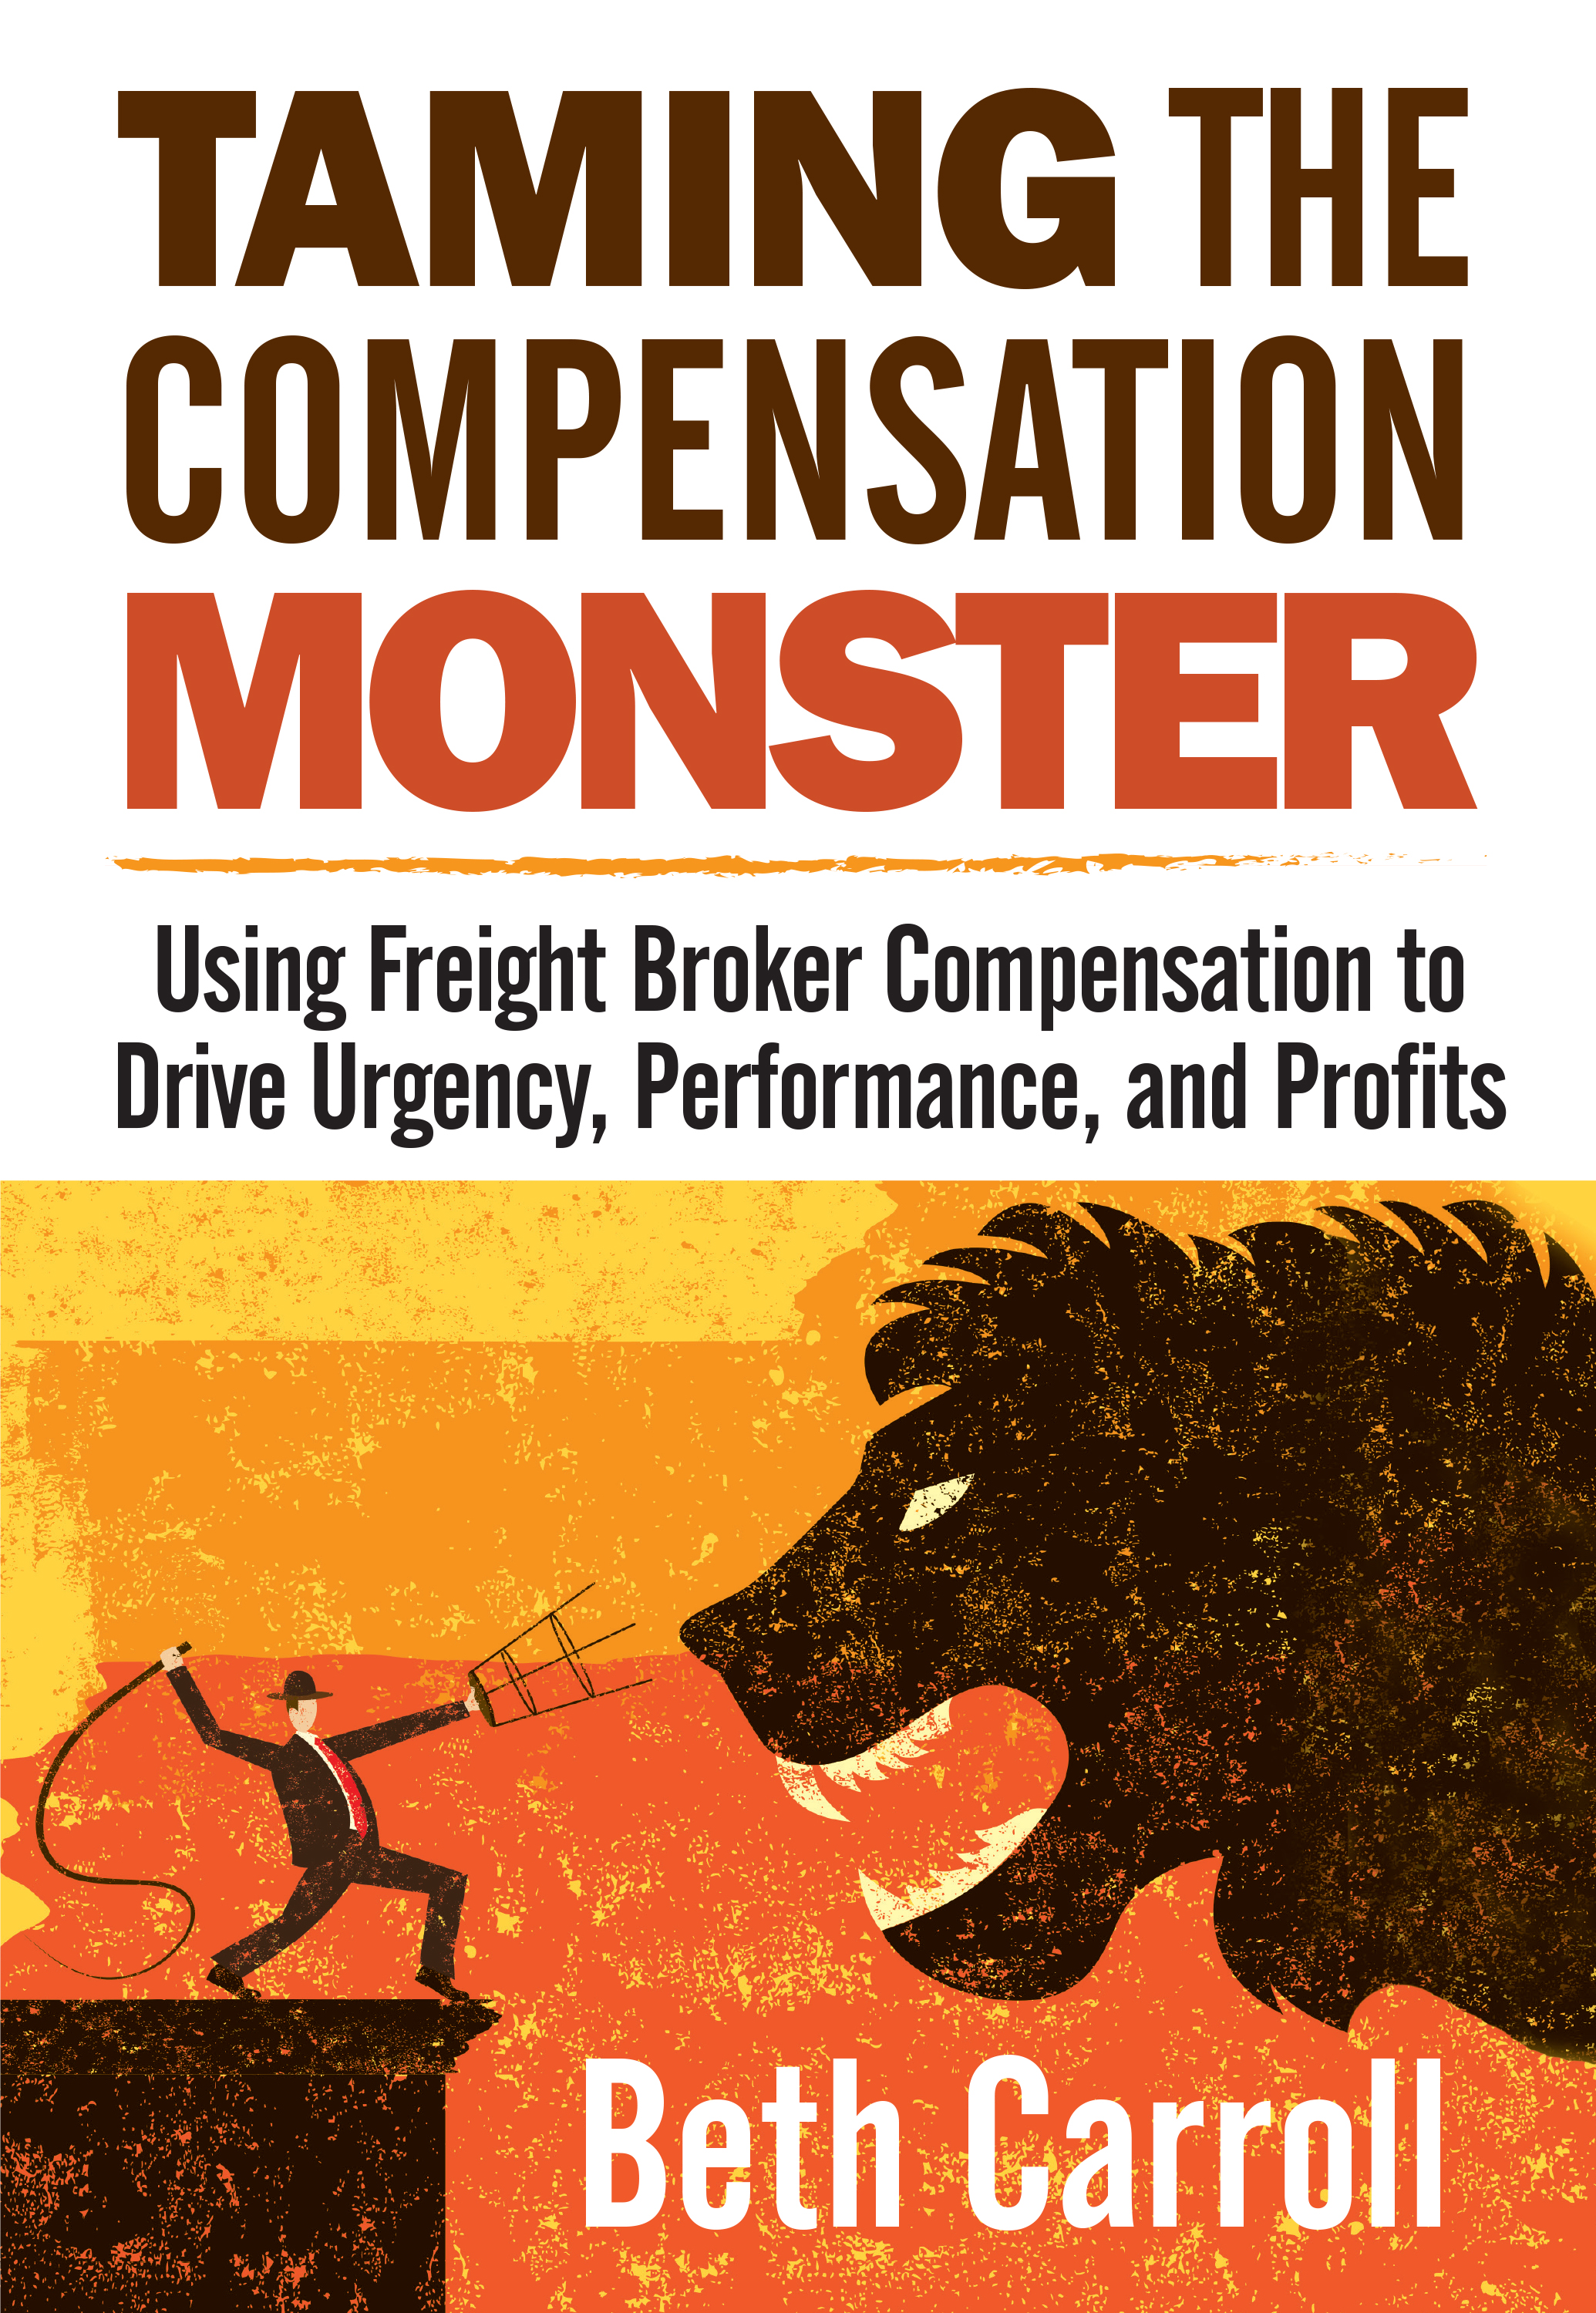 Taming the Compensation Monster